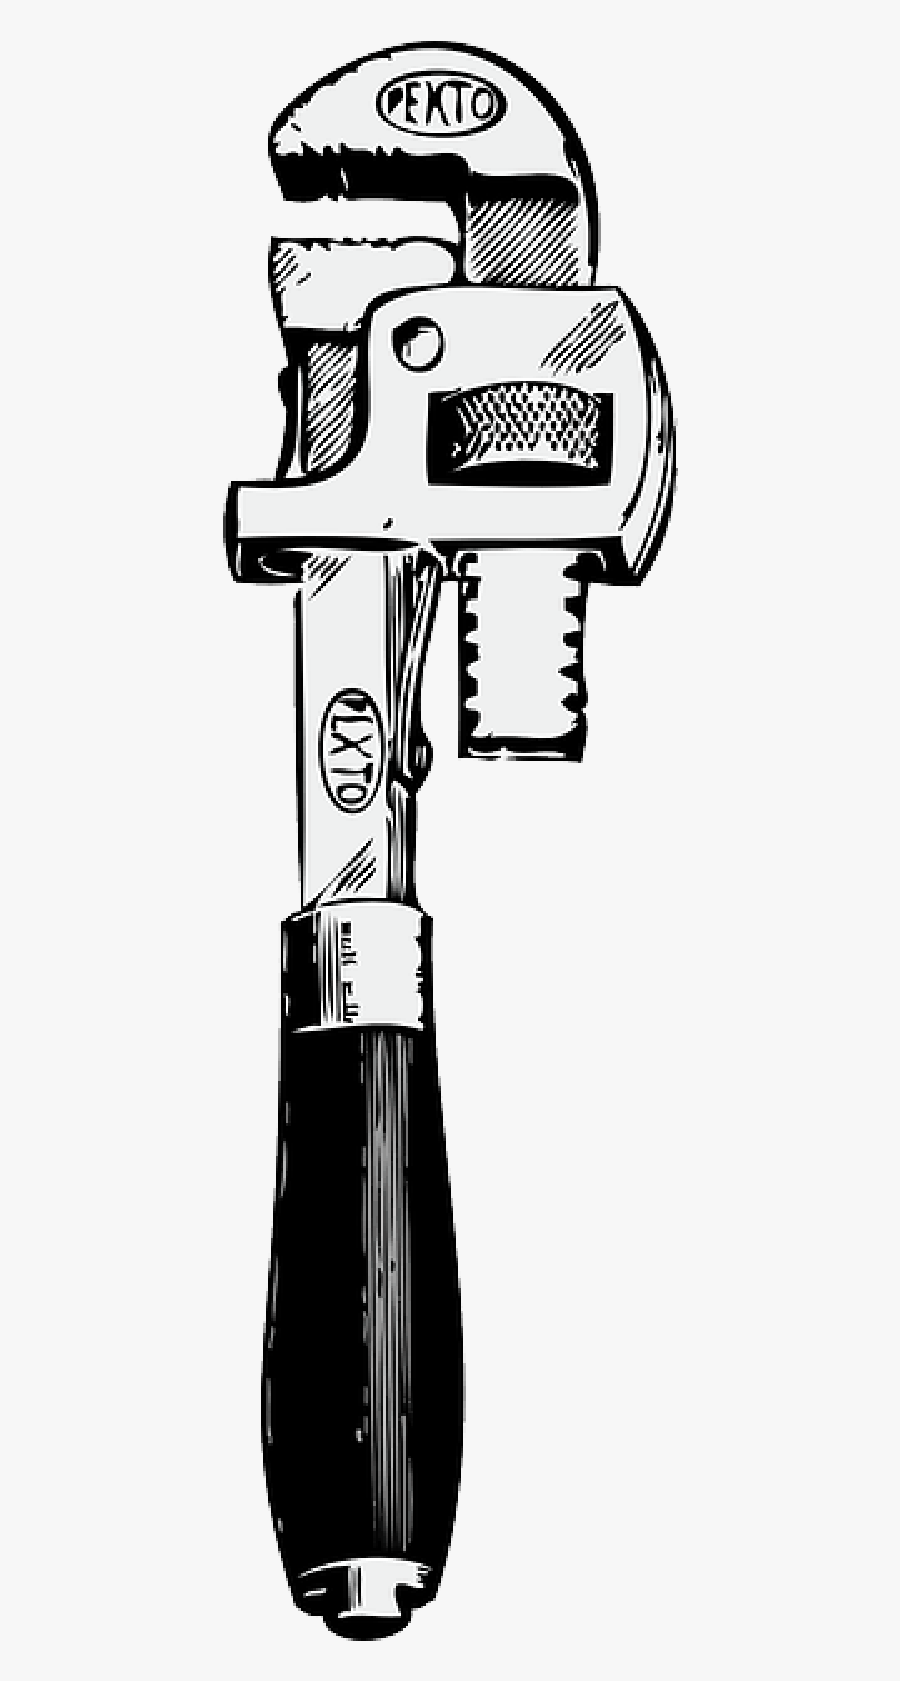 Transparent Plumbing Tools Clipart - Pipe Wrench Clipart, Transparent Clipart